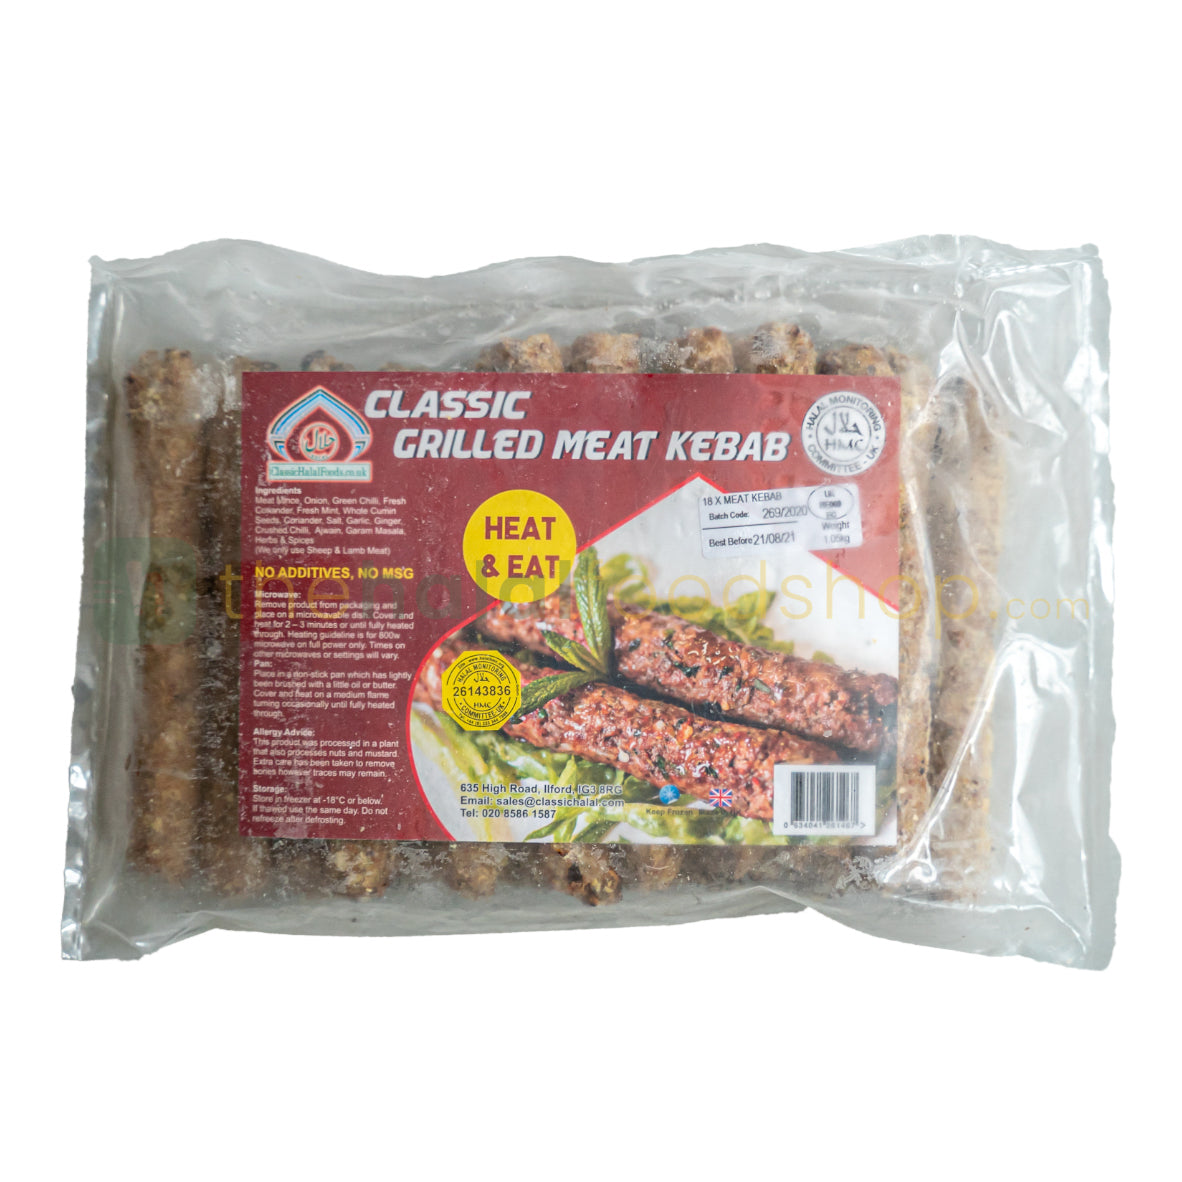 Classic Grilled Meat Kebabs 18 pcs (1.05kg)